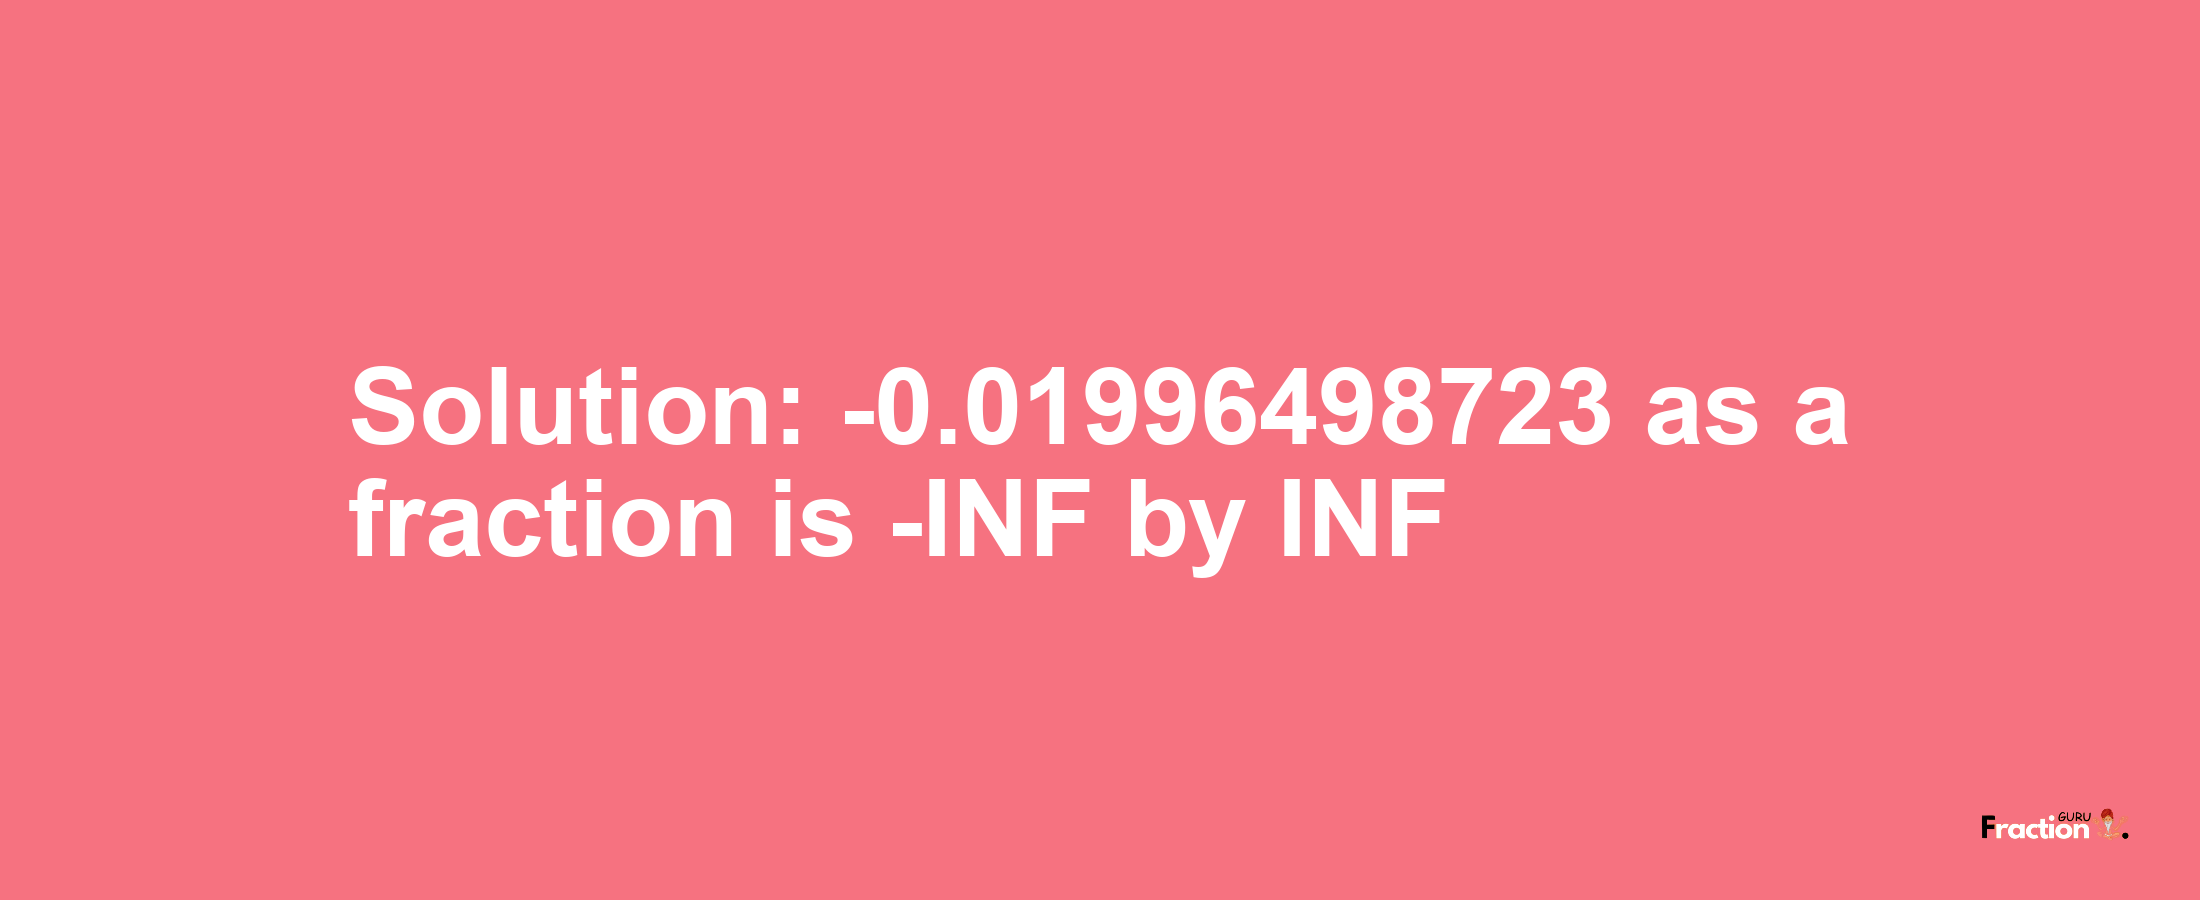 Solution:-0.01996498723 as a fraction is -INF/INF